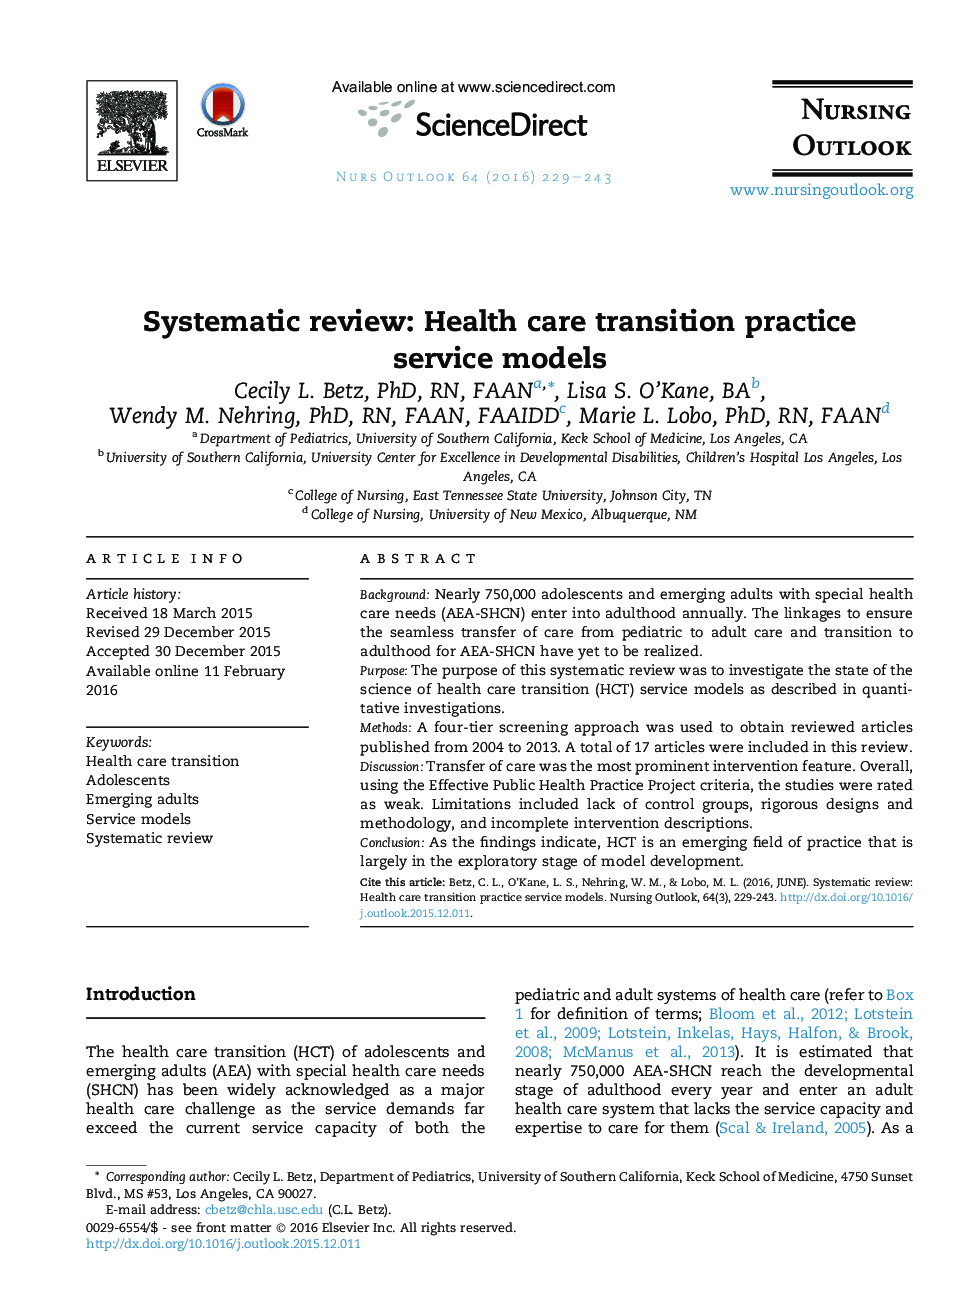 Systematic review: Health care transition practice service models